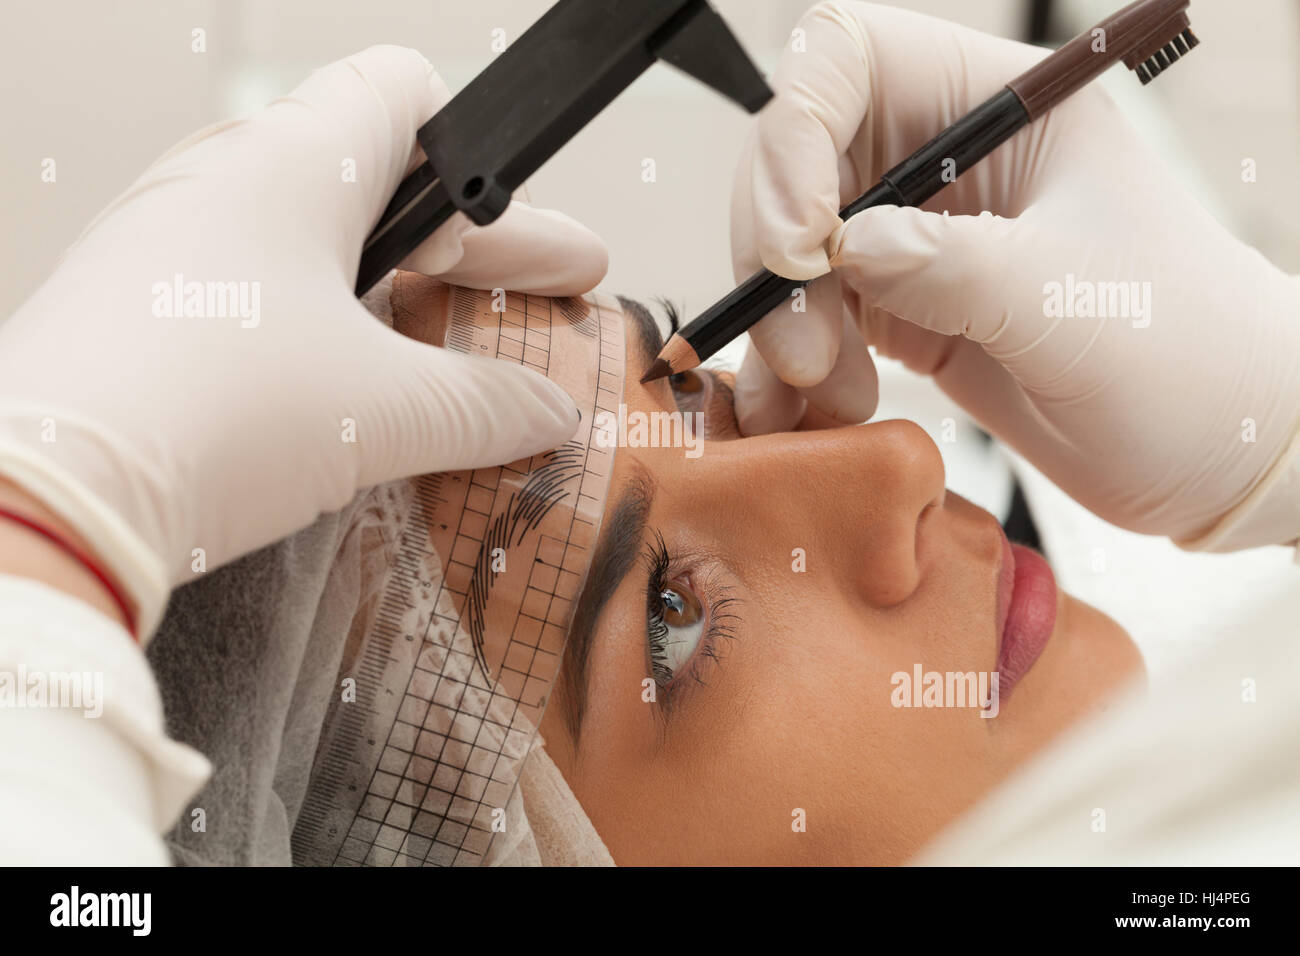 Permanent make up eyebrows in beauty salon Stock Photo